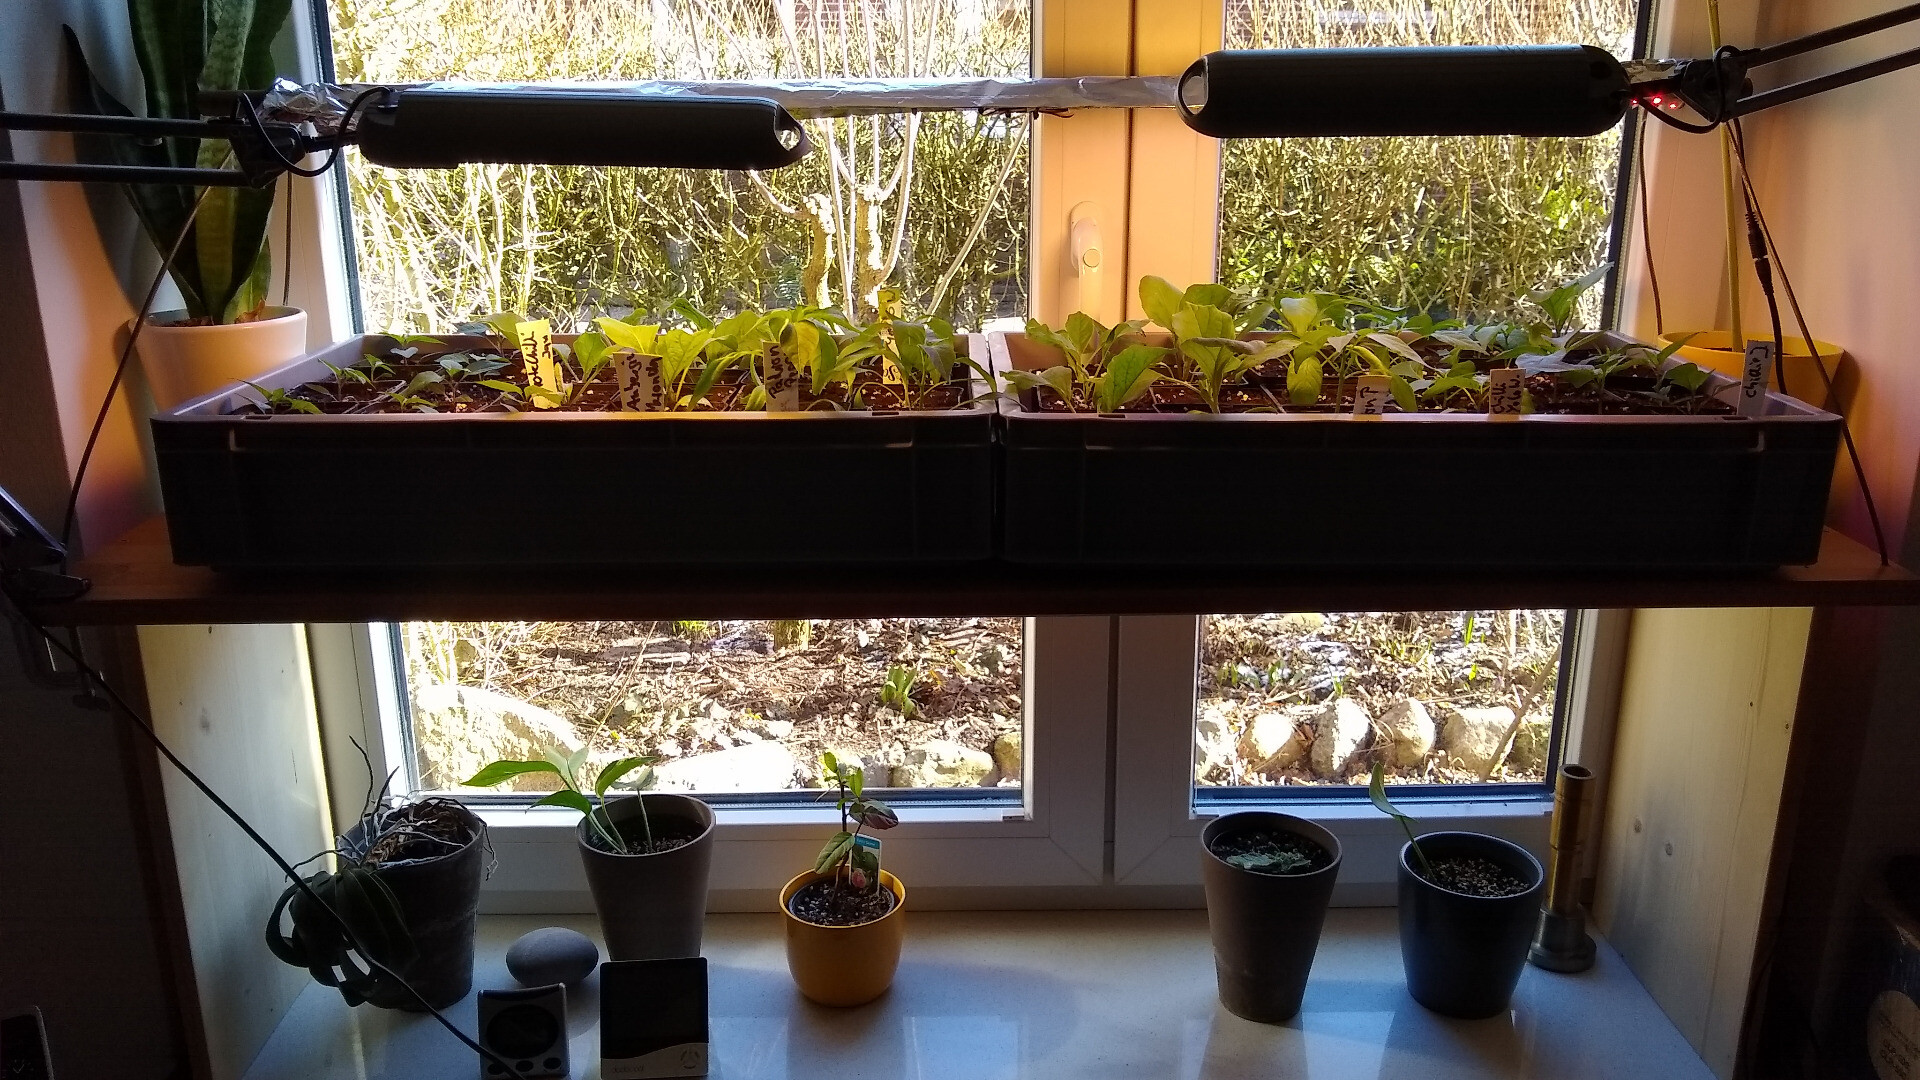 makeshift propagation shelf in use with boxes full of seedlings